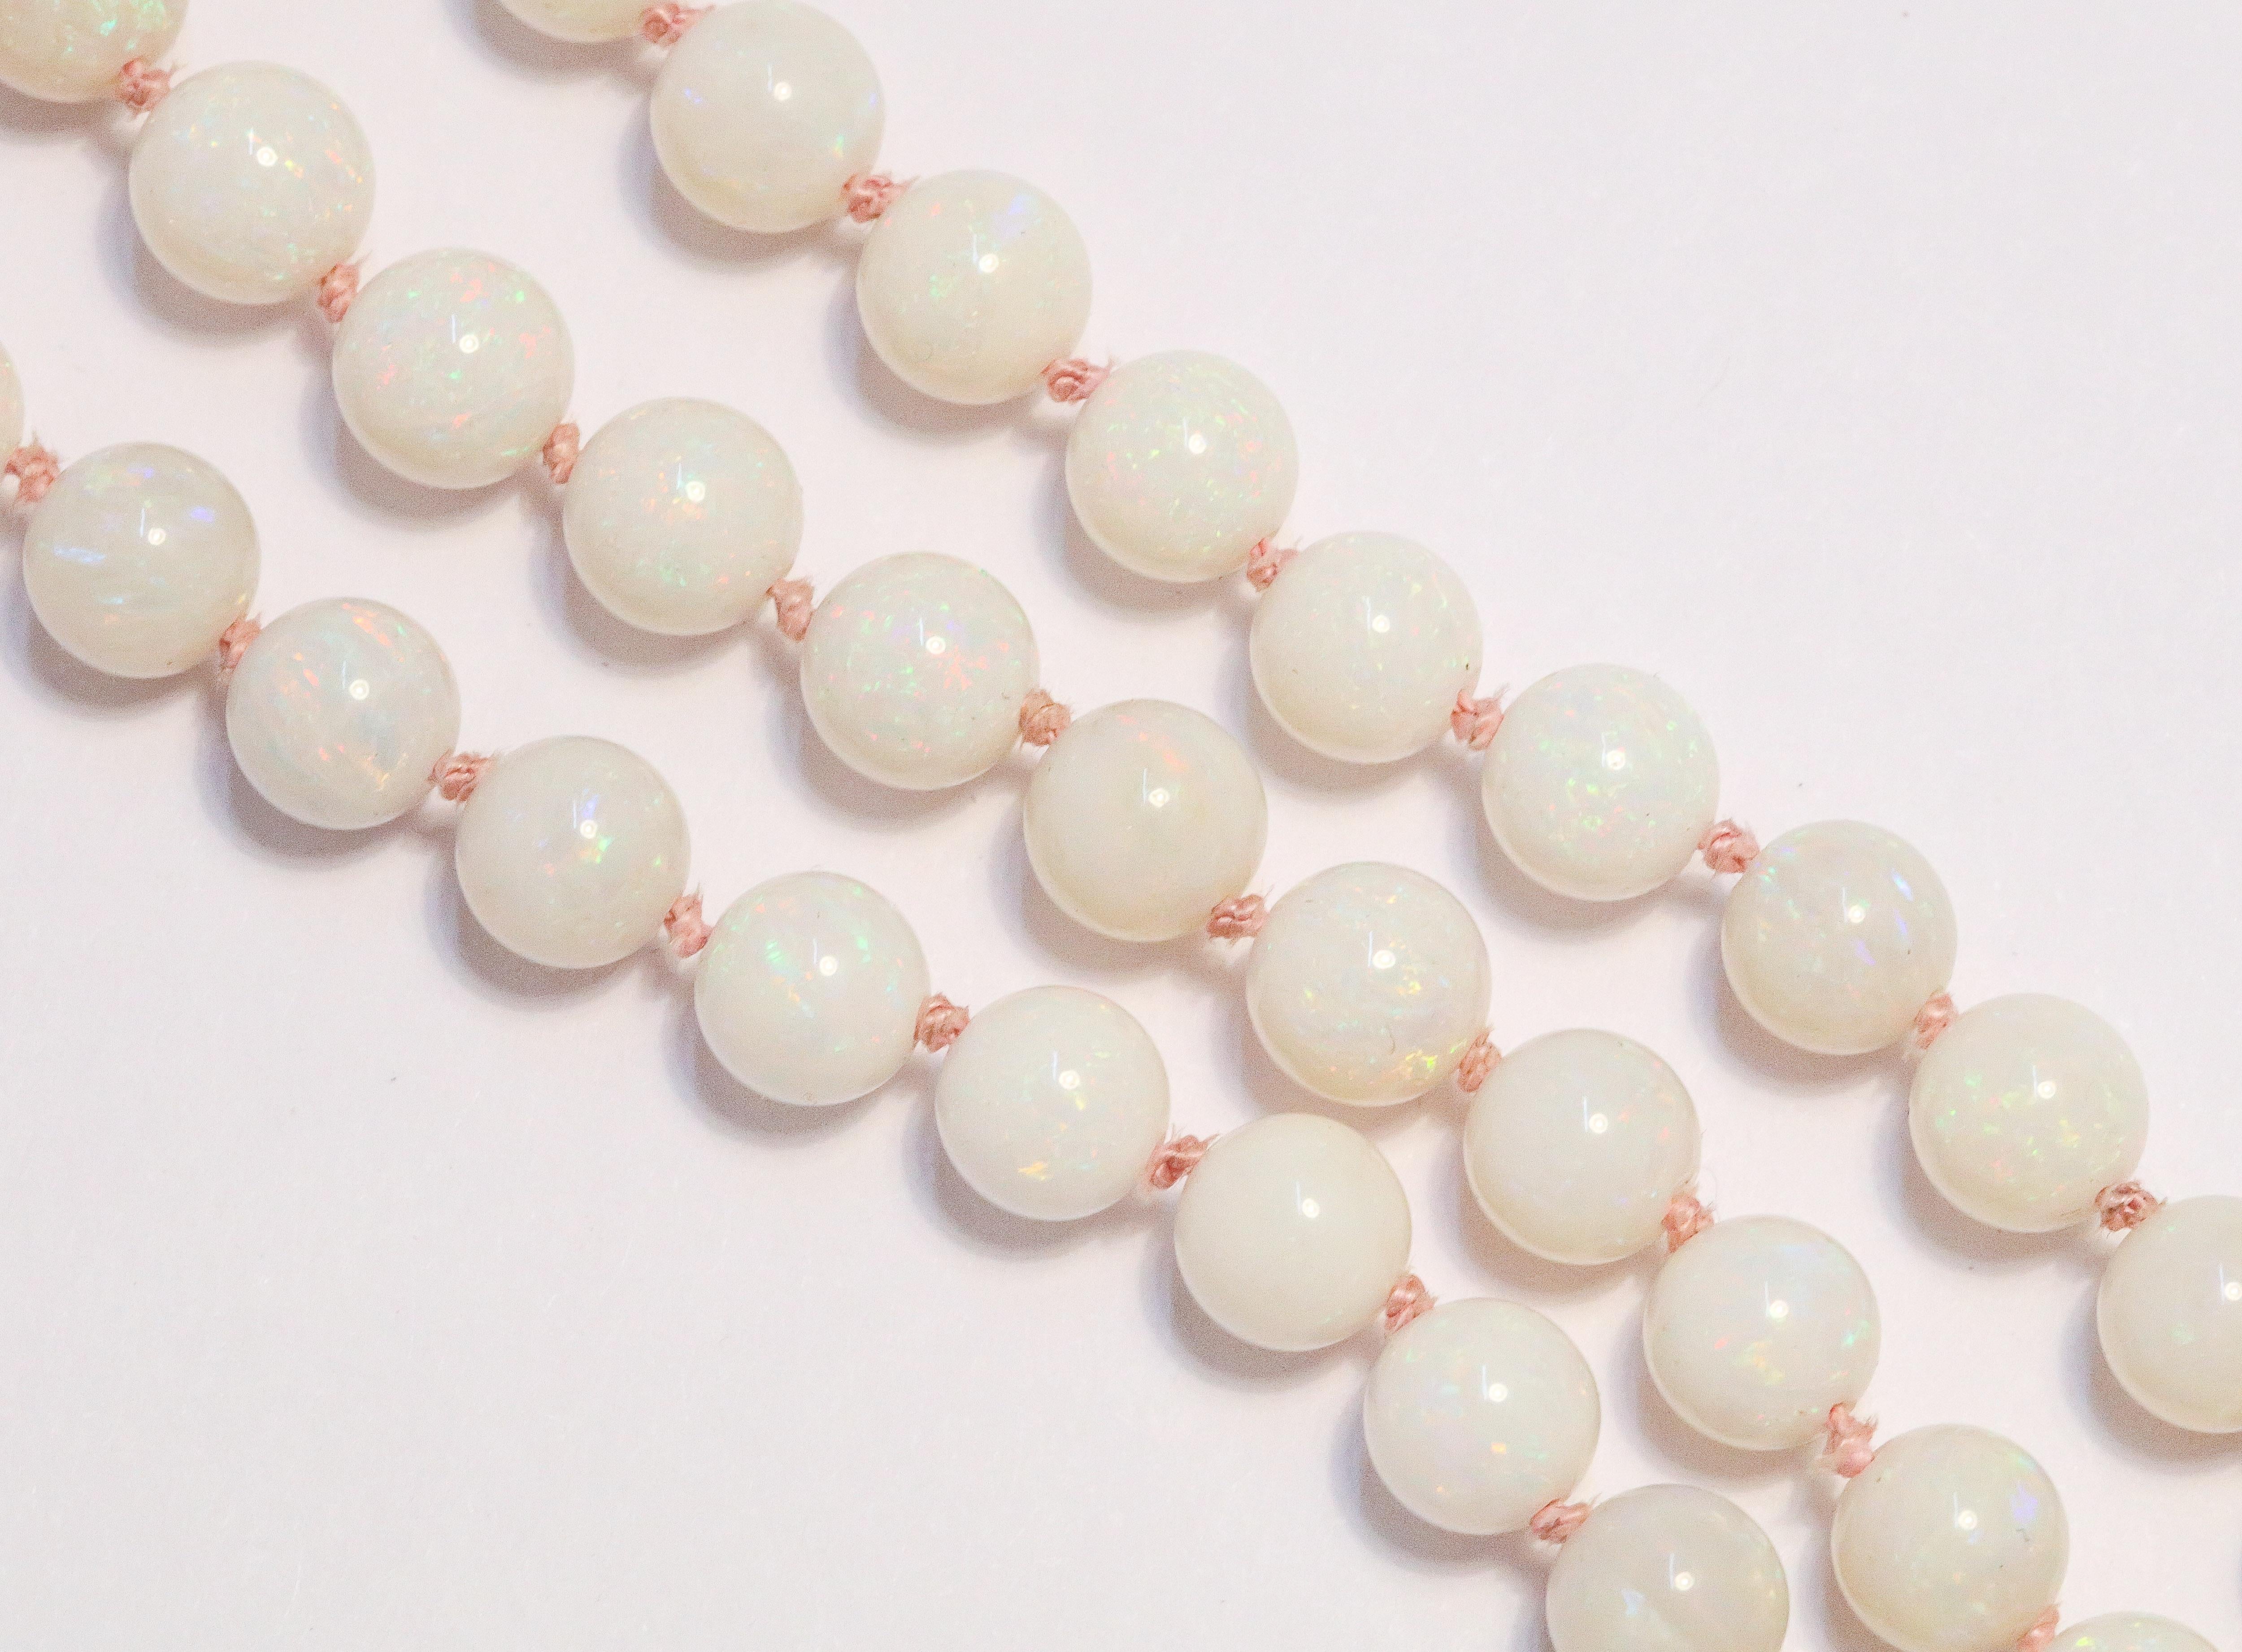 1960's Ladies Iridescent Opal Beaded Necklace.
22 inches Long Necklace
14k yellow Gold Clap
23 Grams of a total 71 opal white beads
6.6mm size of biggest Opal